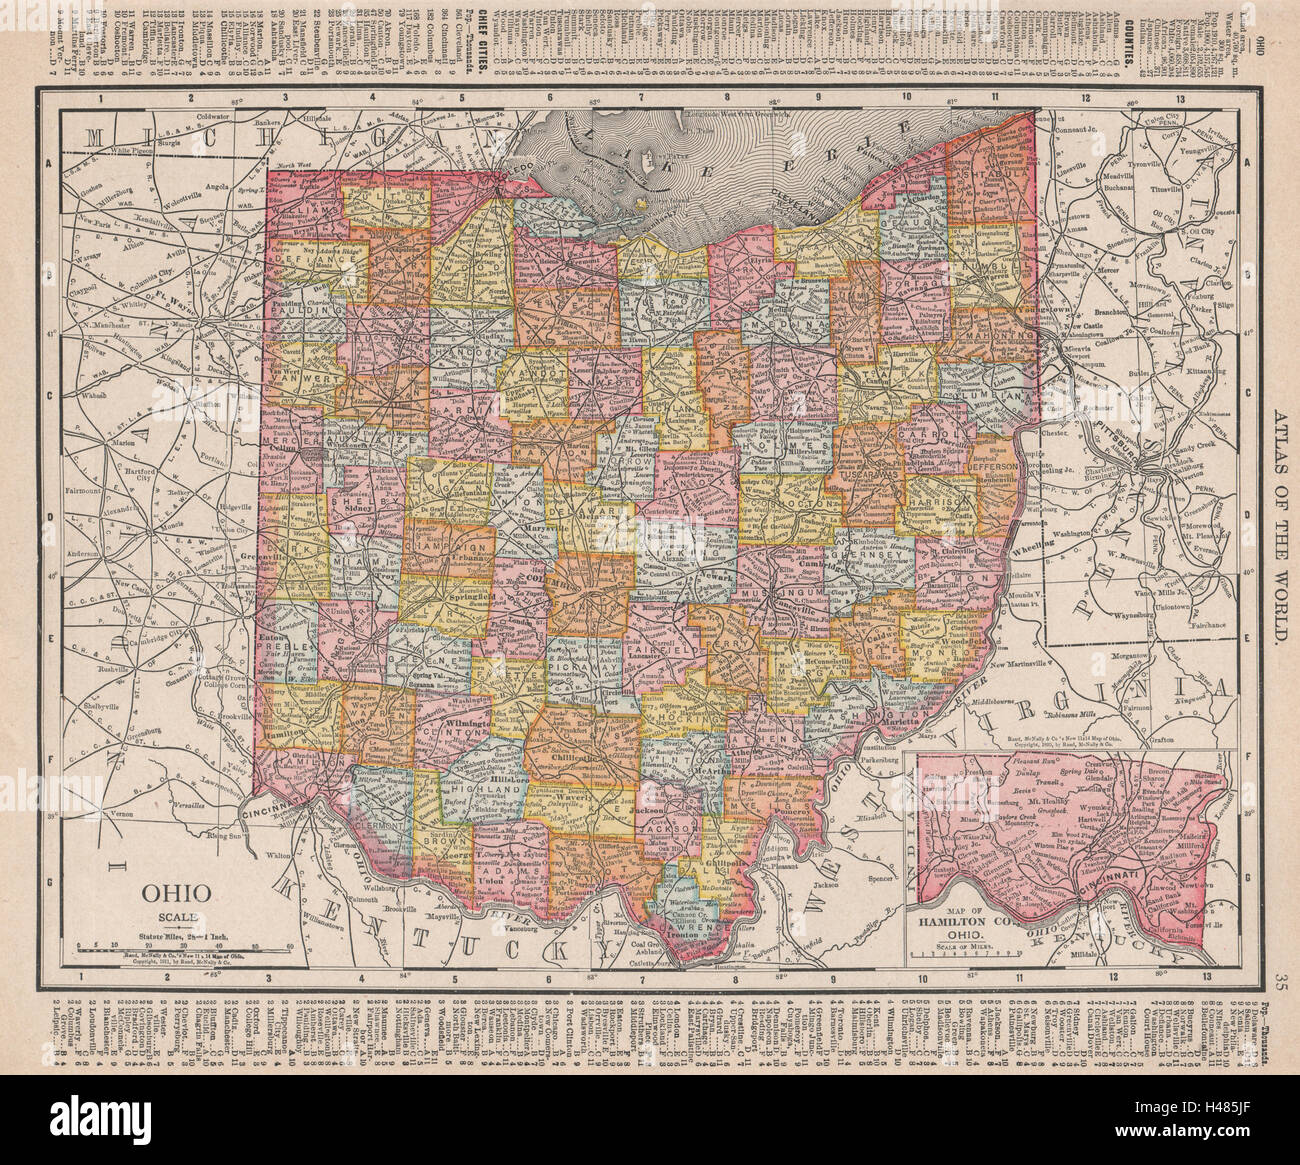 Ohio state map showing counties. RAND MCNALLY 1912 old antique plan chart Stock Photo